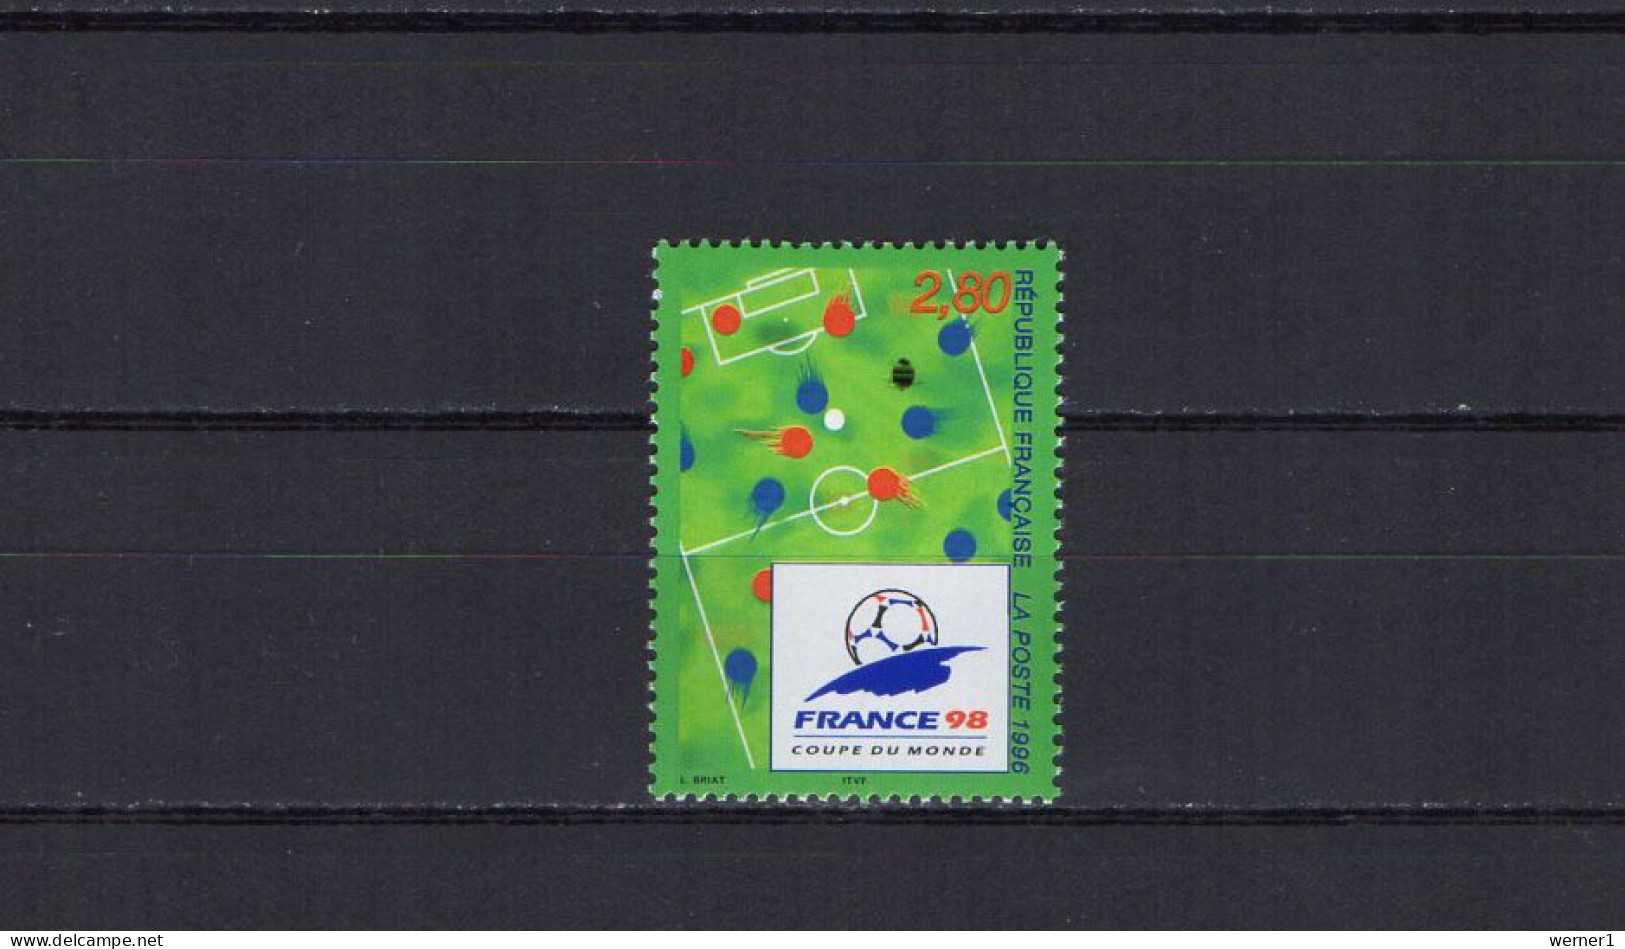 France 1995 Football Soccer World Cup Stamp MNH - 1998 – Frankreich